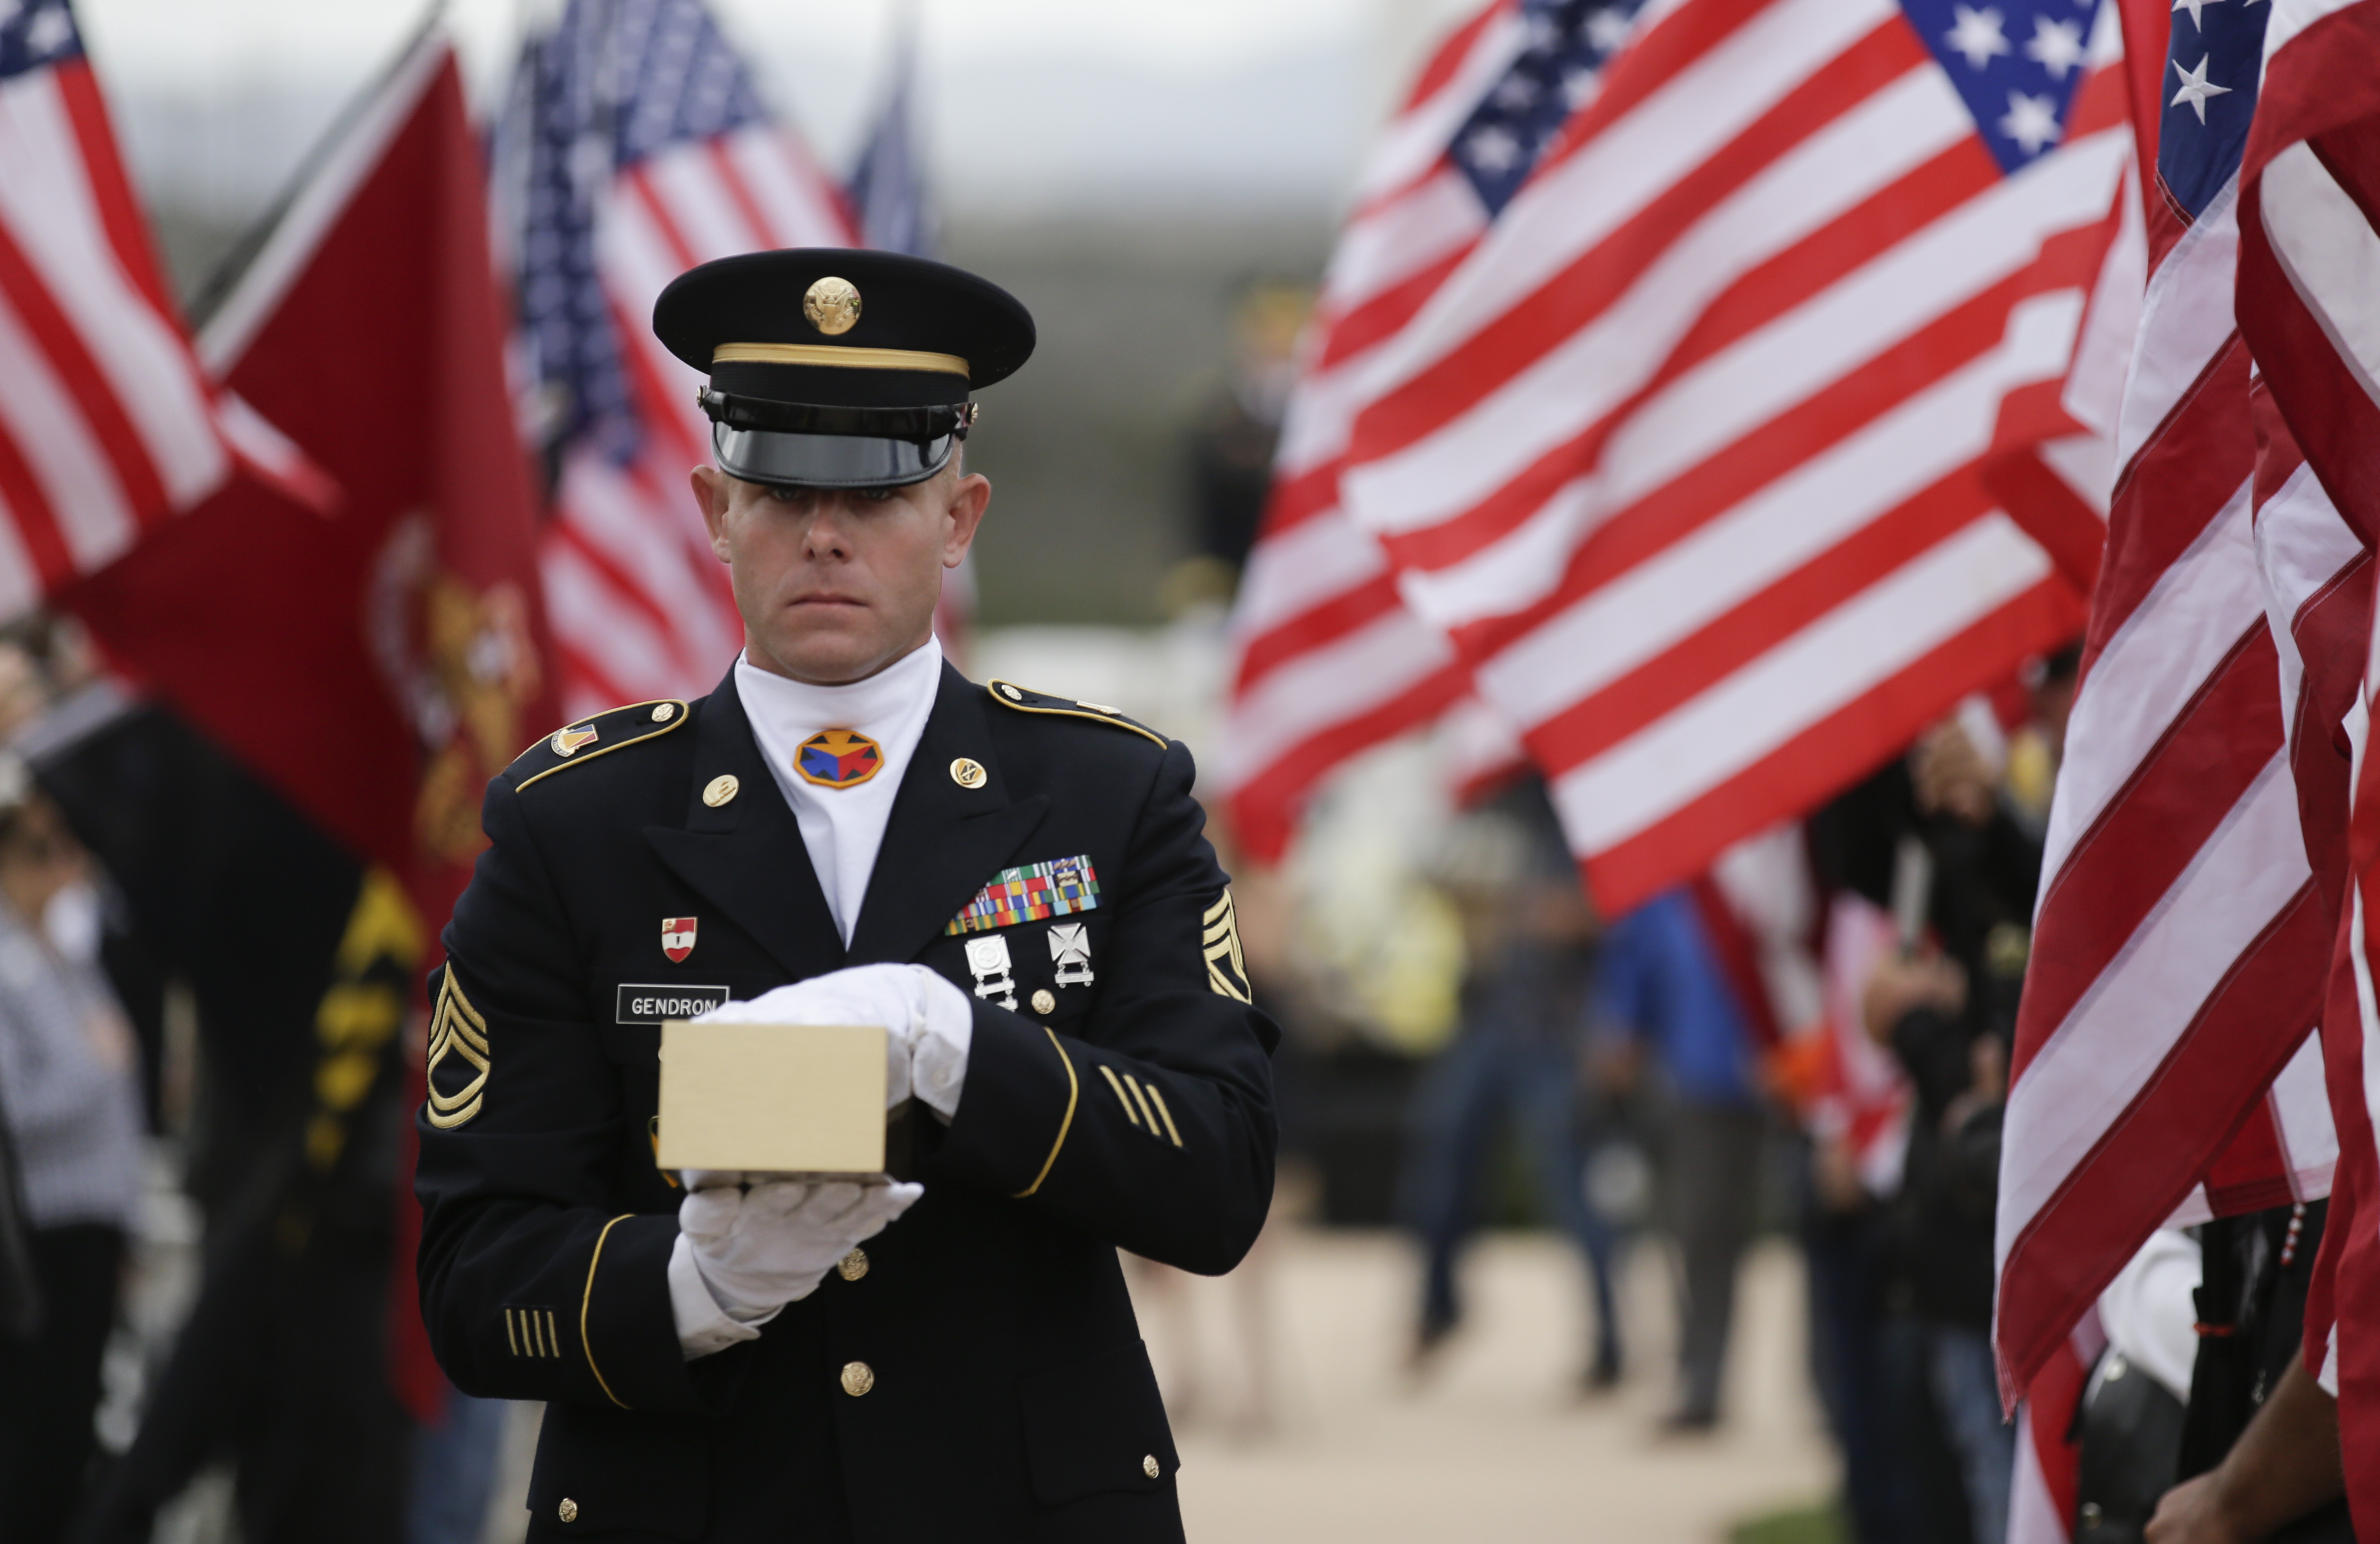 Army Sgt. 1st Class Joshua Gendron carries the remains of Army Sgt. Charles Schroeter, who was awarded the Congressional Medal of Honor for gallantry in an 1869 battle during the Indian Wars during a service with full military honors at Miramar National Cemetery Thursday, July 9, 2015 in San Diego. Schroeter’s remains were located only recently, when the Congressional Medal of Honor Historical Society traced them to San Diego’s Greenwood Memorial Park, where they had rested since 1921.  The remains were interred in an unmarked crypt, along with other unclaimed remains. (AP Photo/Chris Carlson)